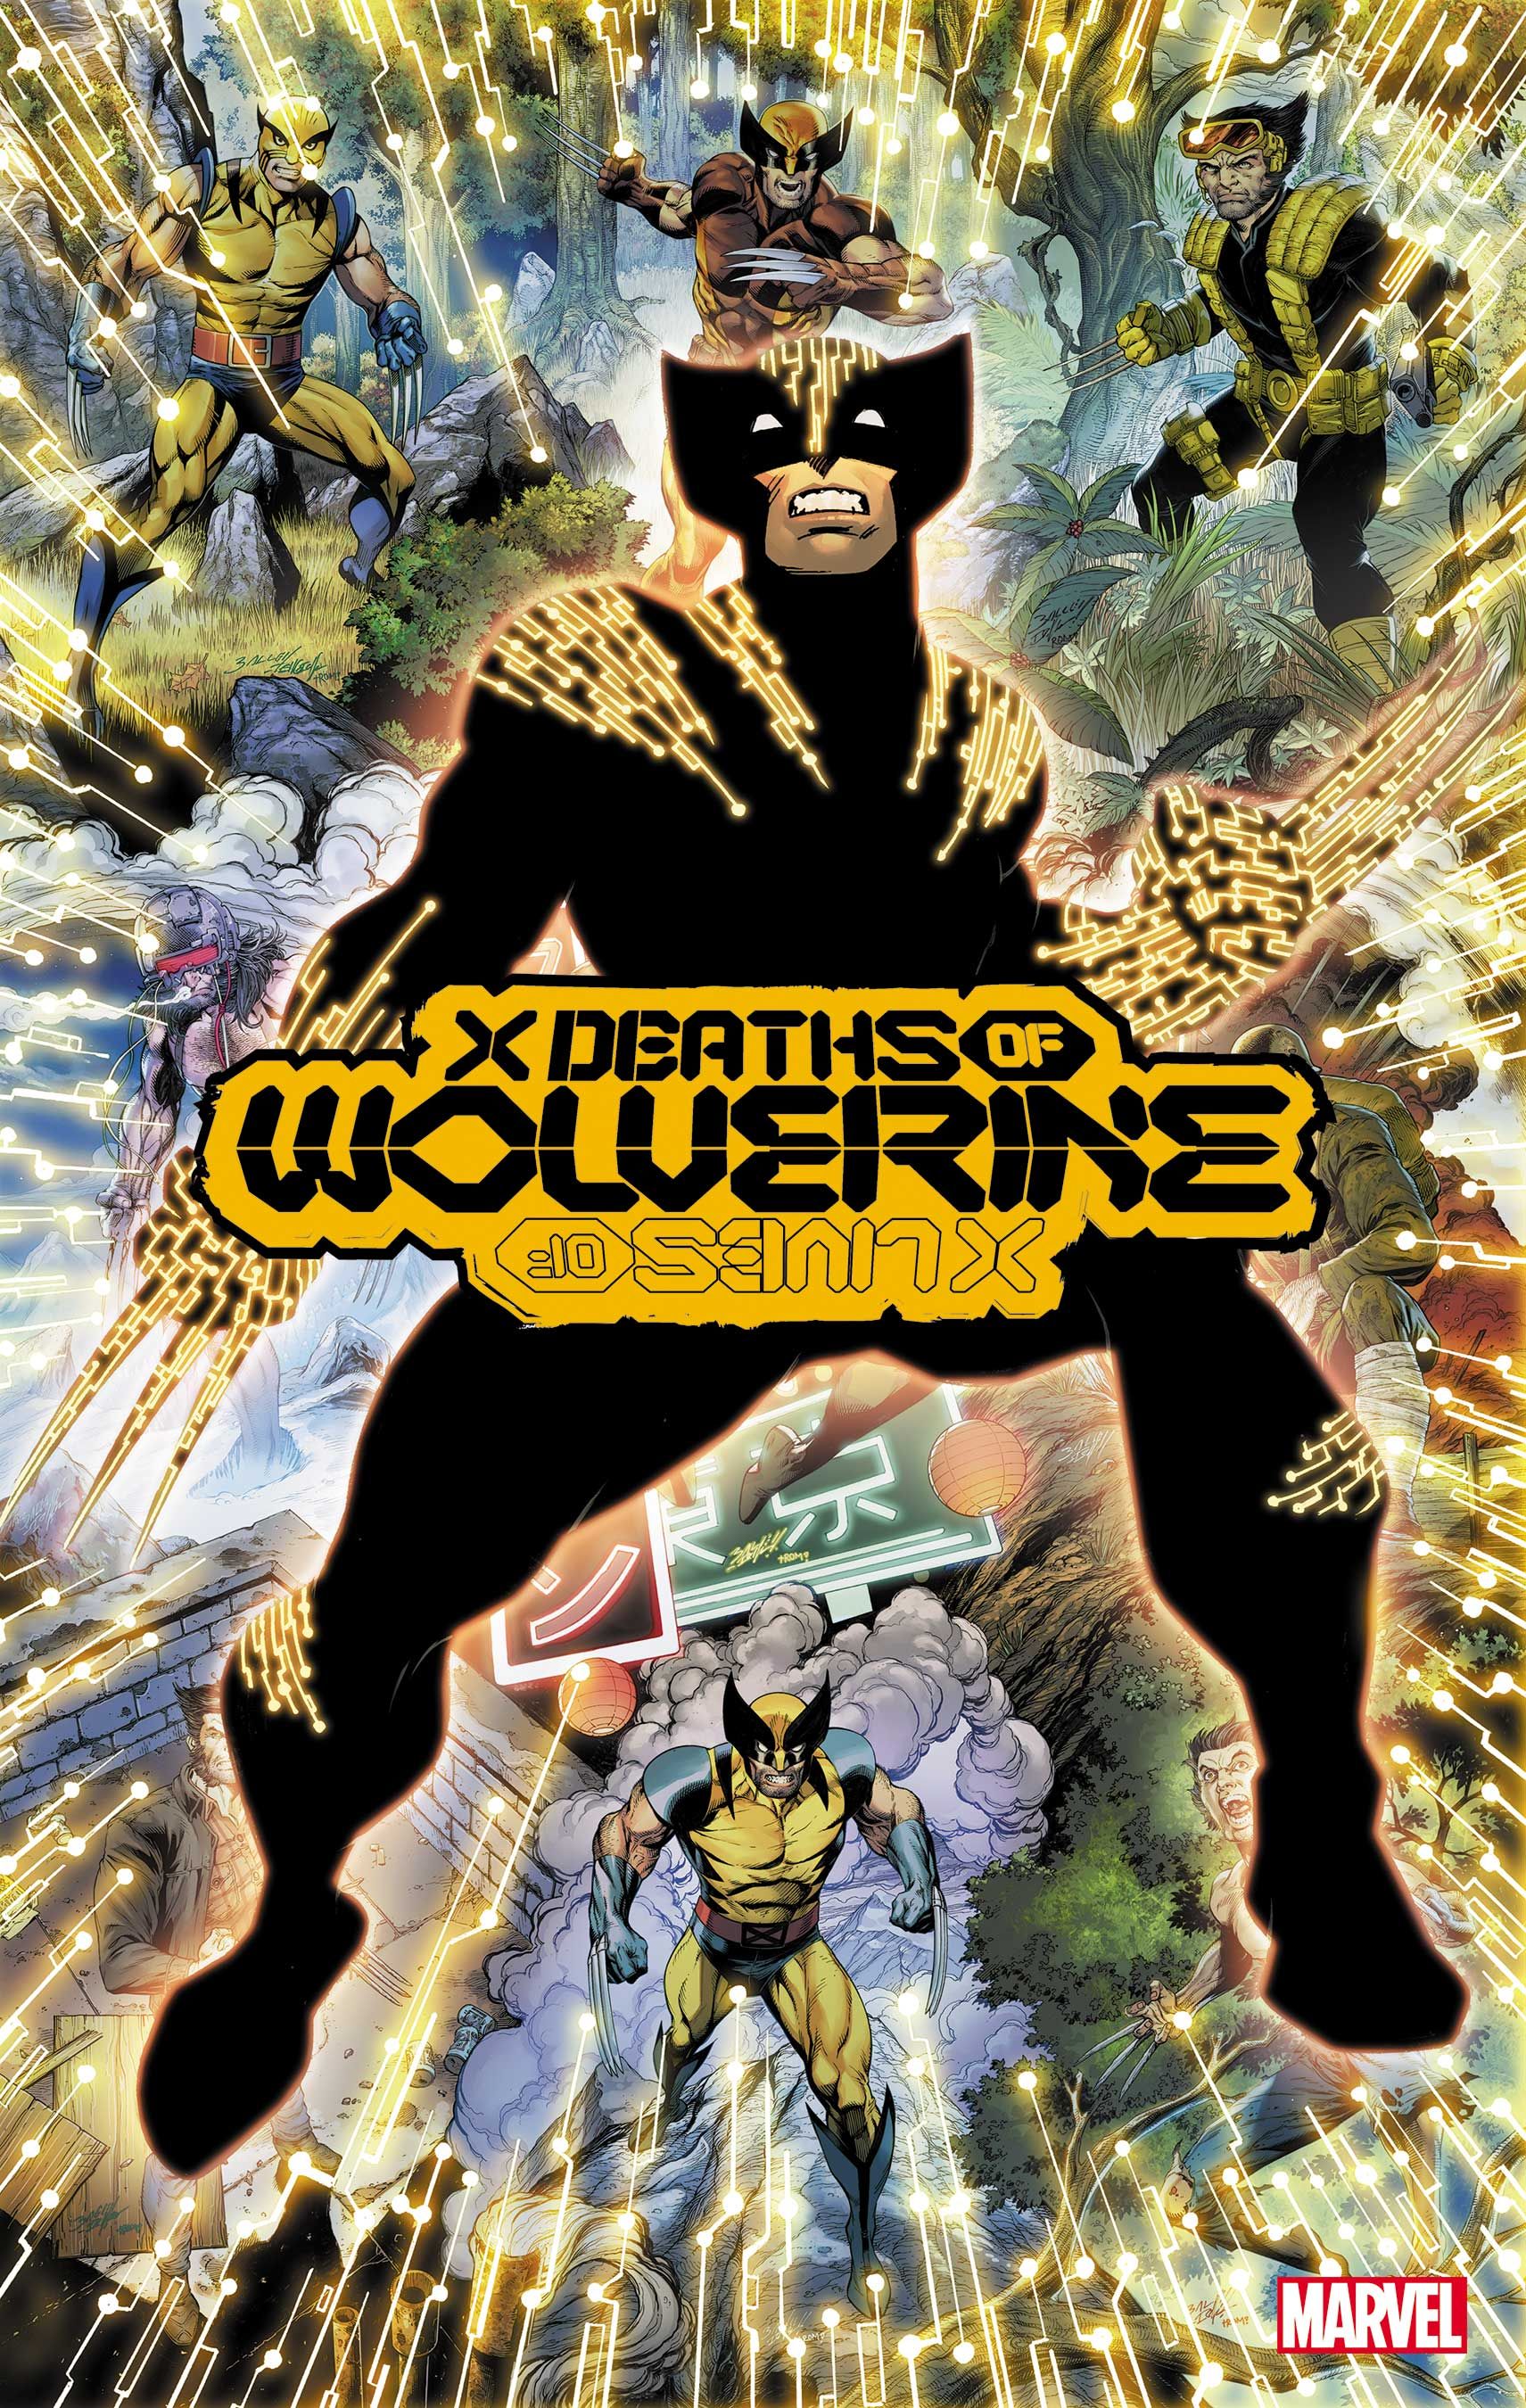 Cover art for X Deaths of Wolverine #5